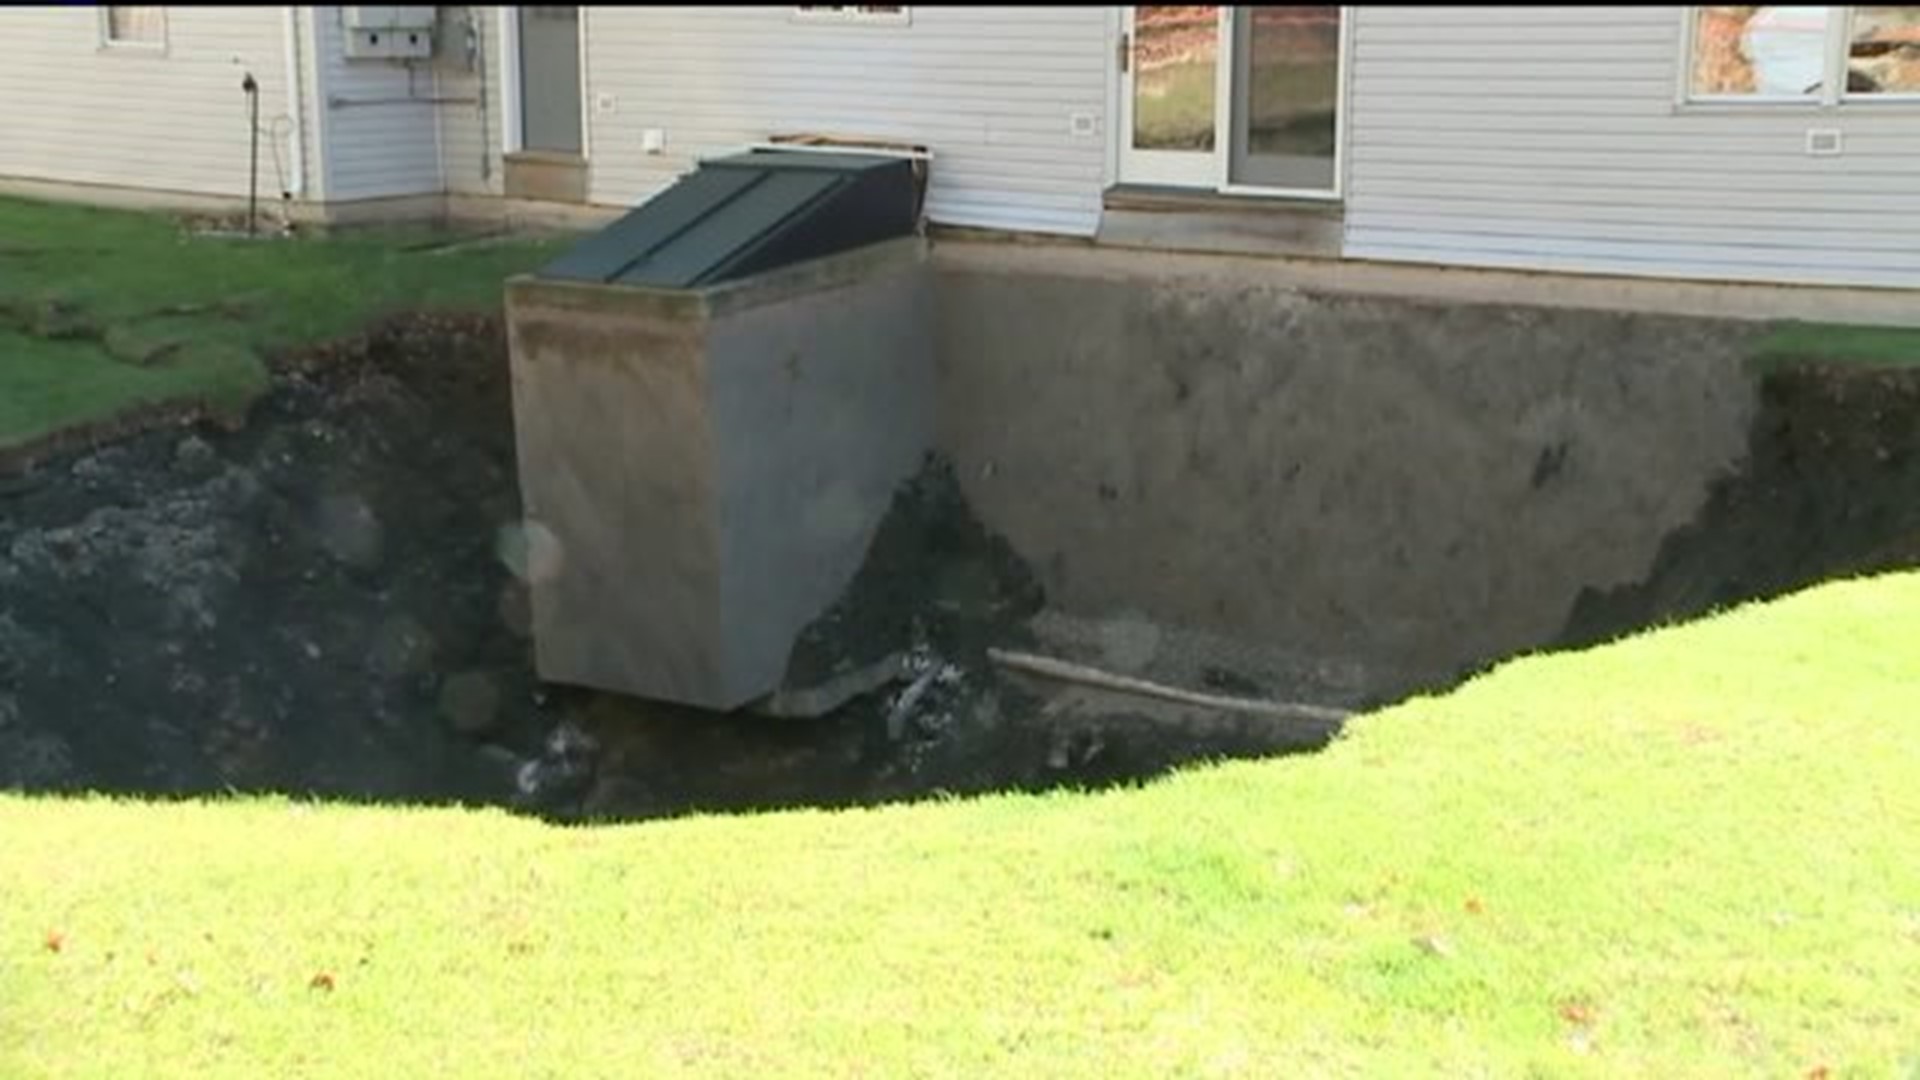 Family Fears Backyard Hole Could Swallow Home | wnep.com